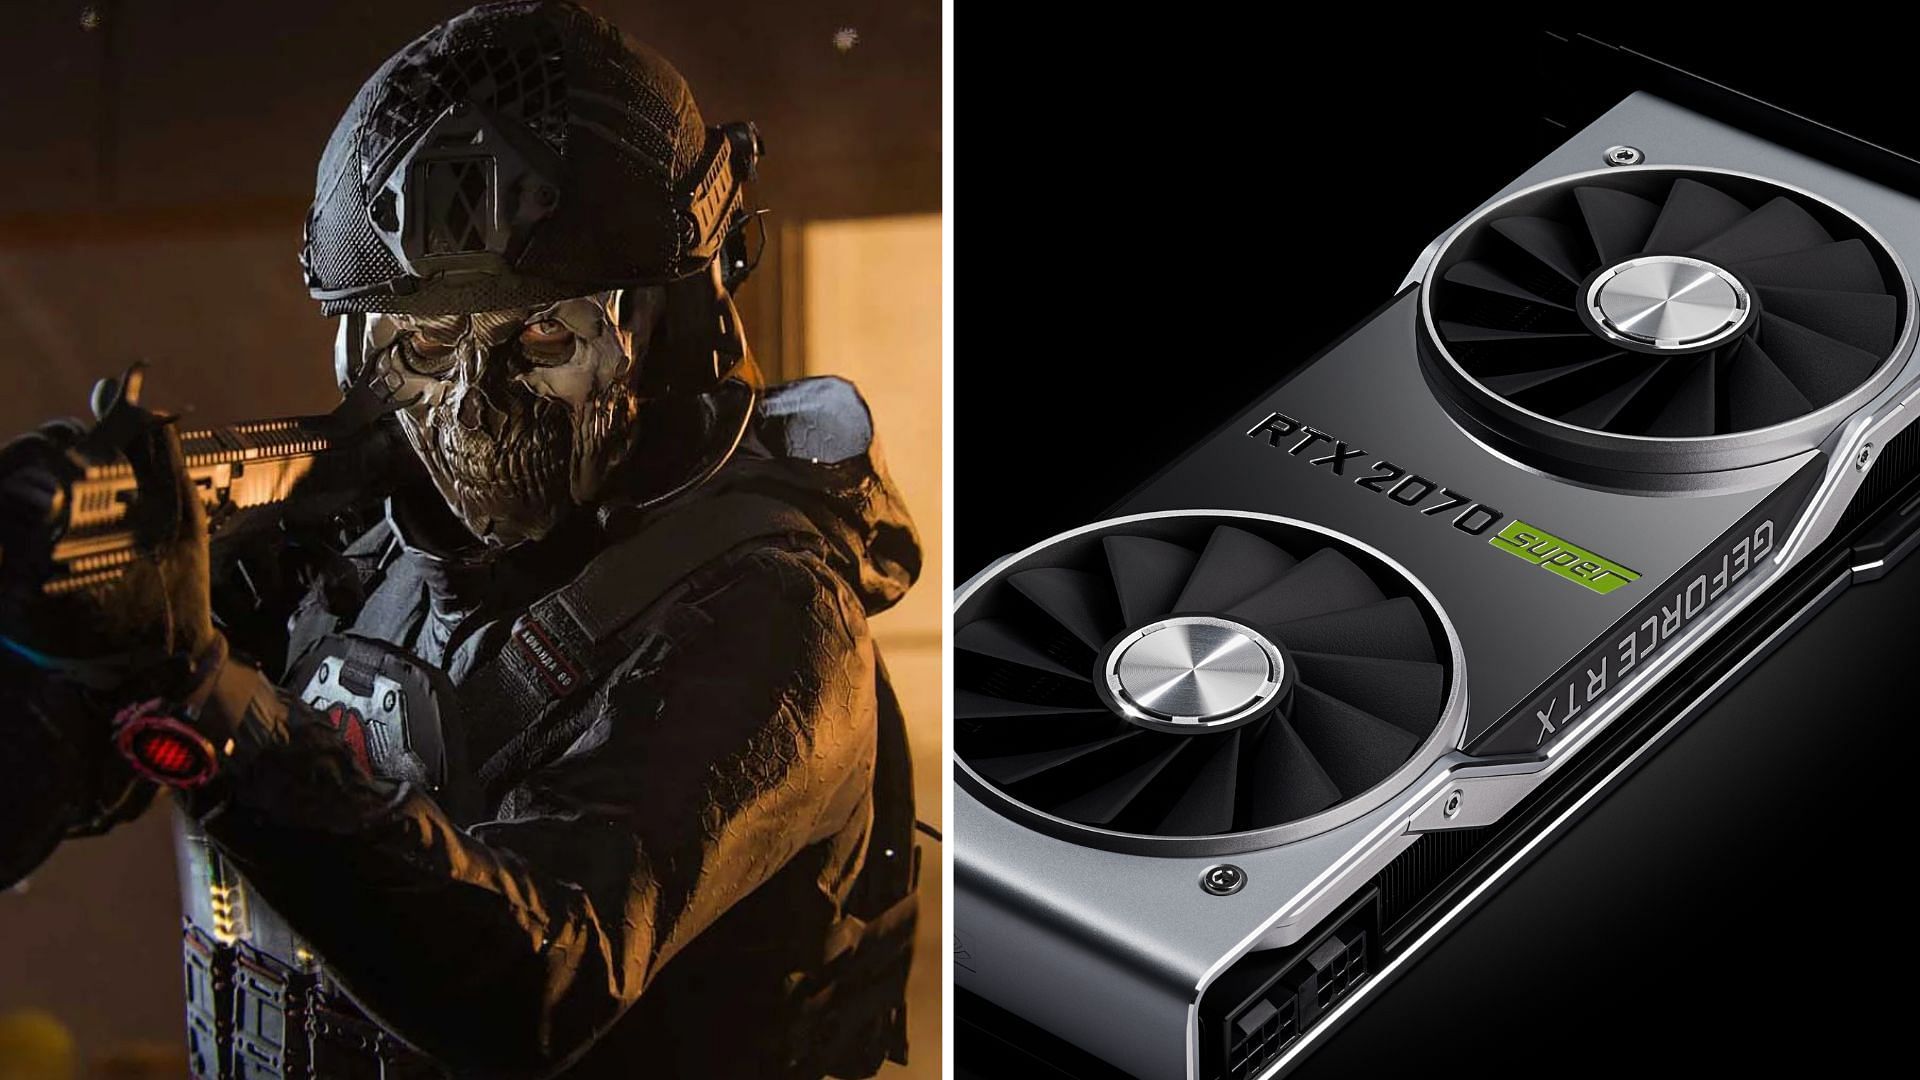 The Nvidia RTX 2070 Super can play Modern Warfare 3 with some compromises (Image via Nvidia and Activision)